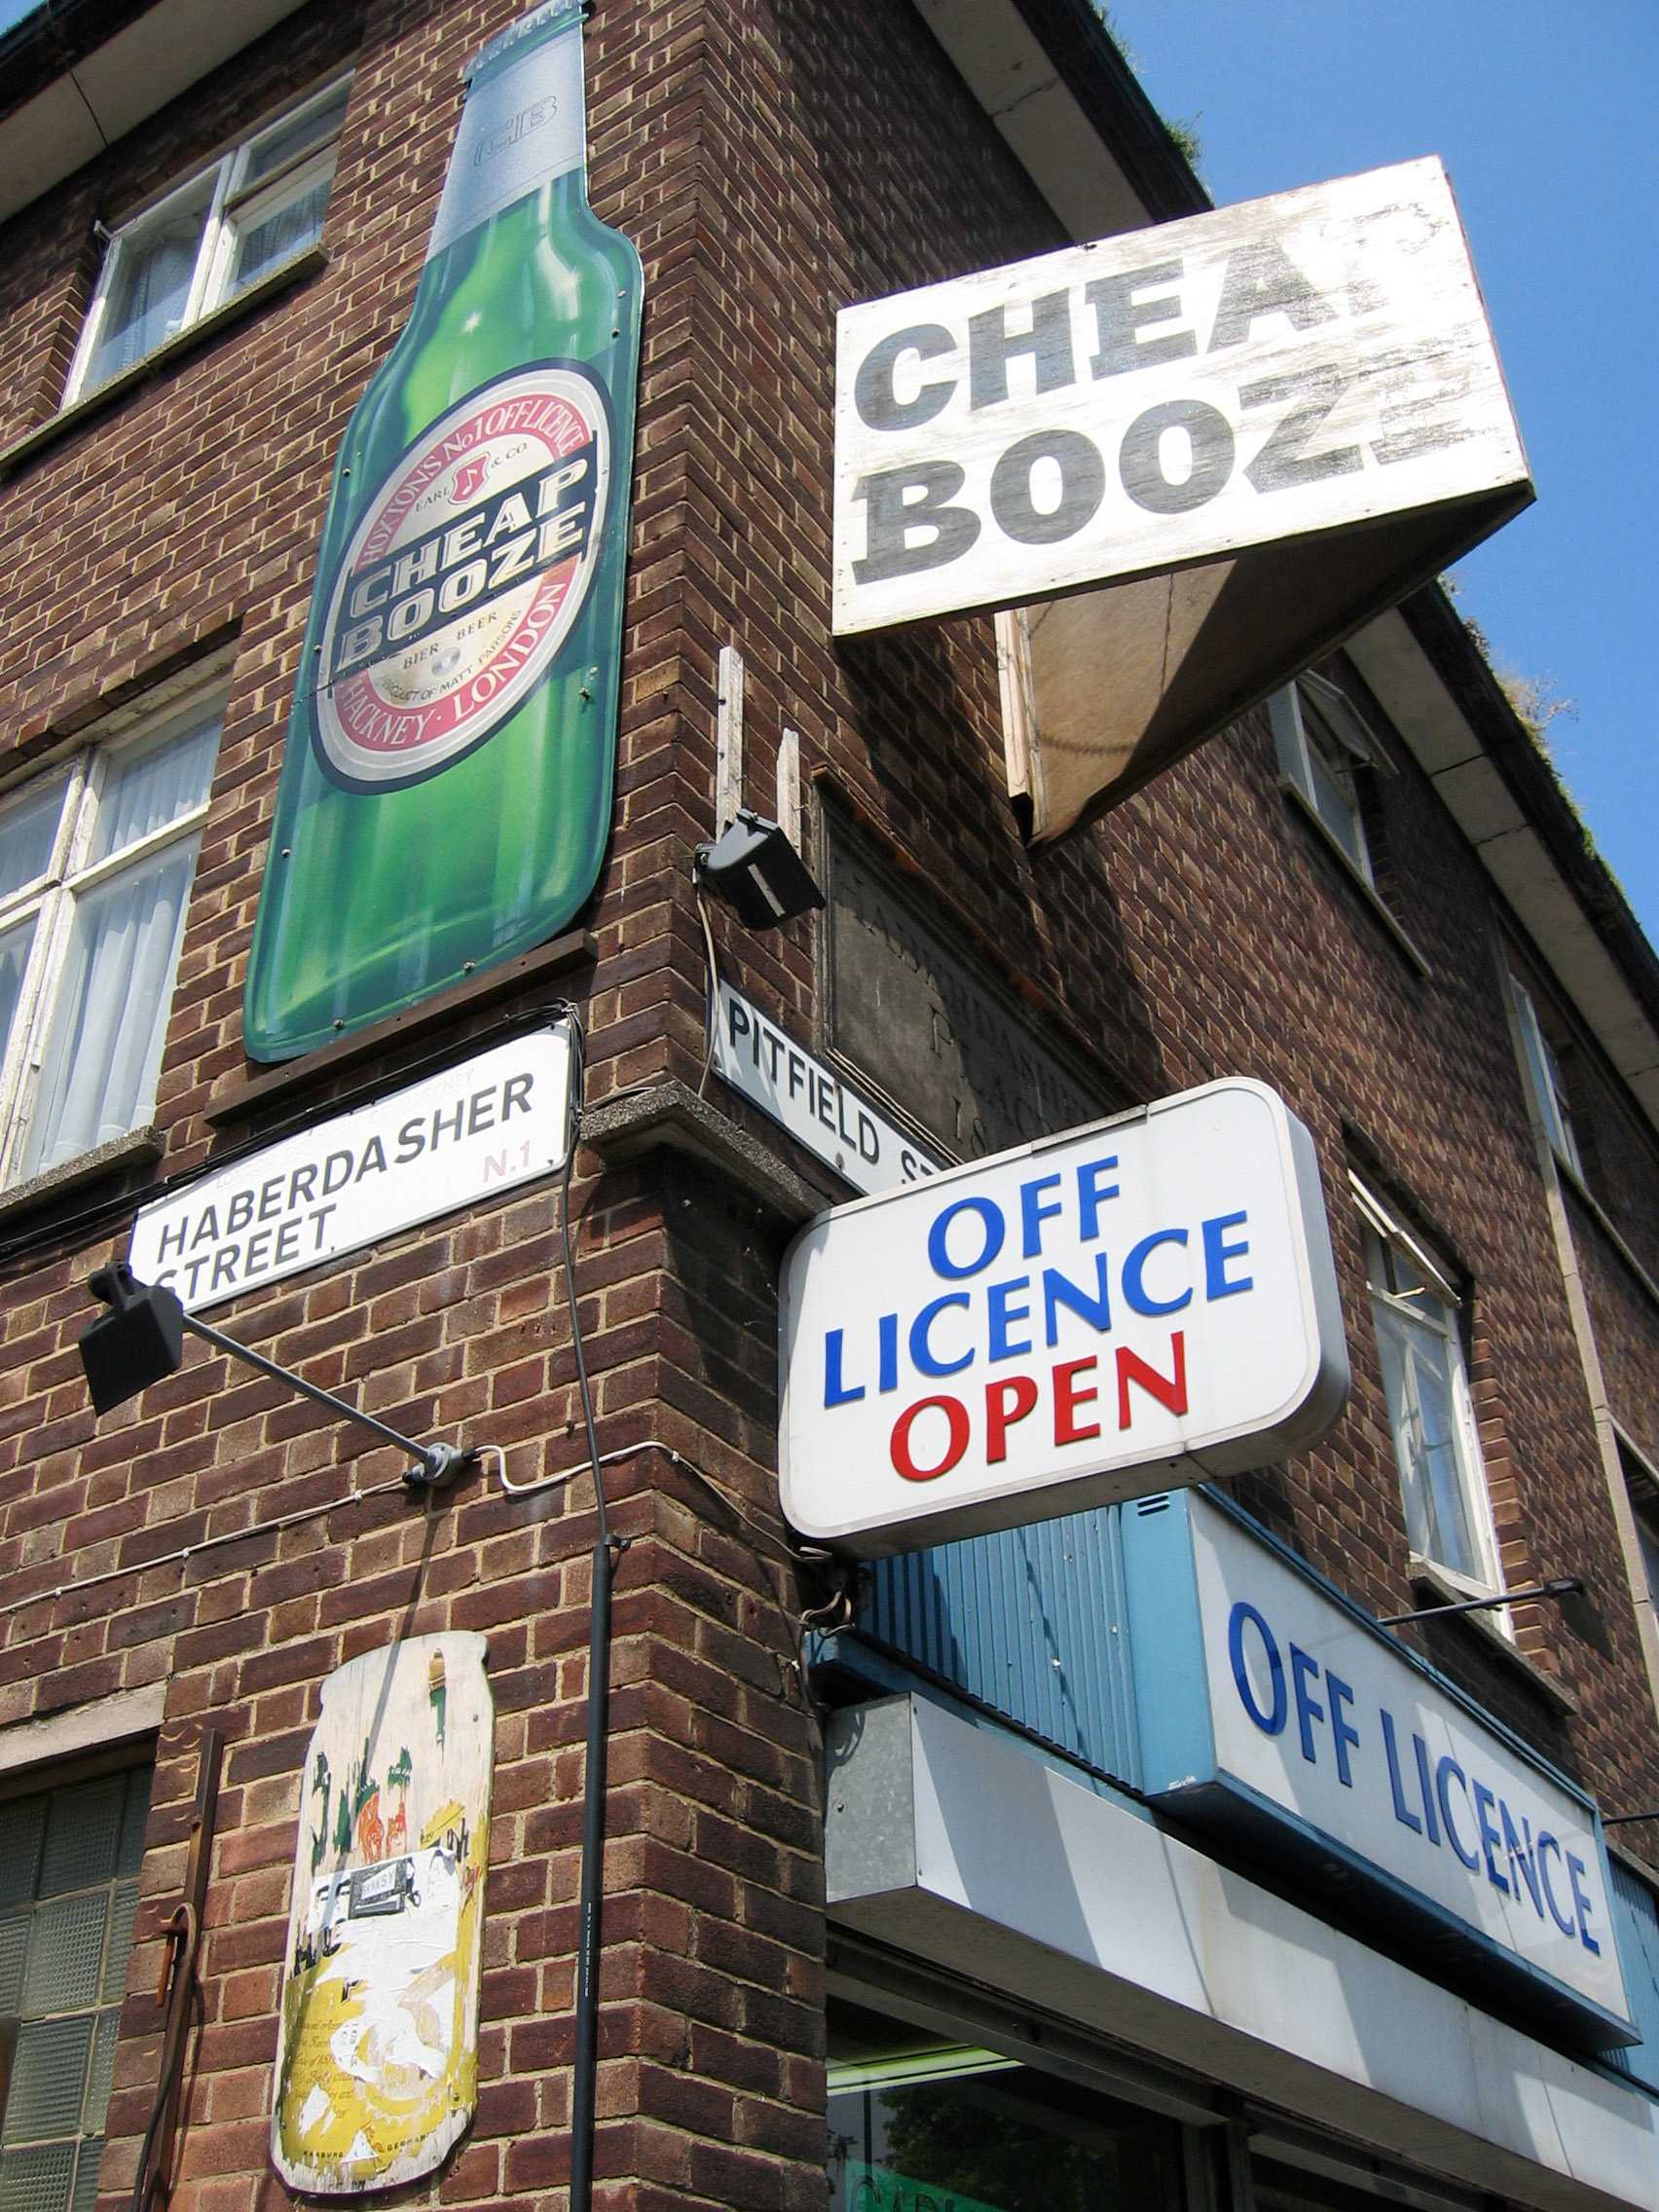 Closeup of the Cheap Booze corner with painted bottle cut-out, original ‘Cheap
Booze’ sign and remains of my first ‘Holsten’ cut-out sign.

